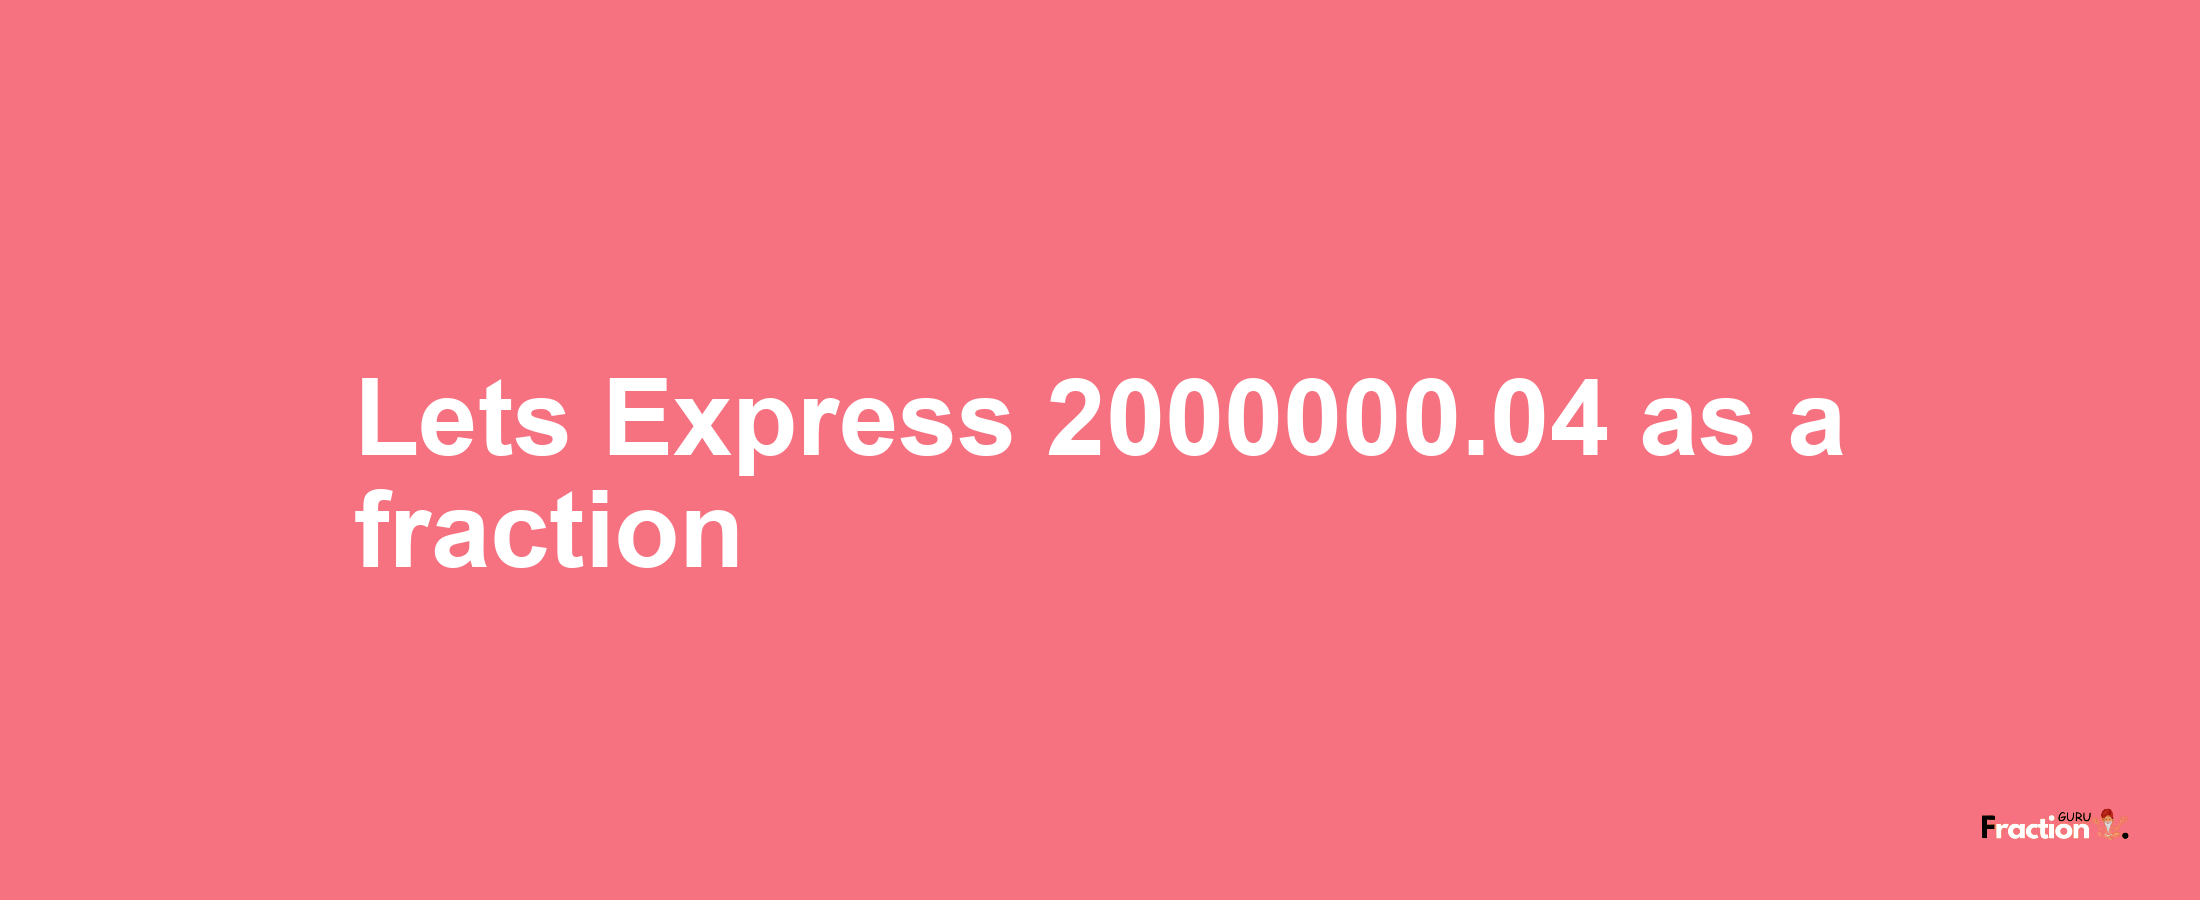 Lets Express 2000000.04 as afraction